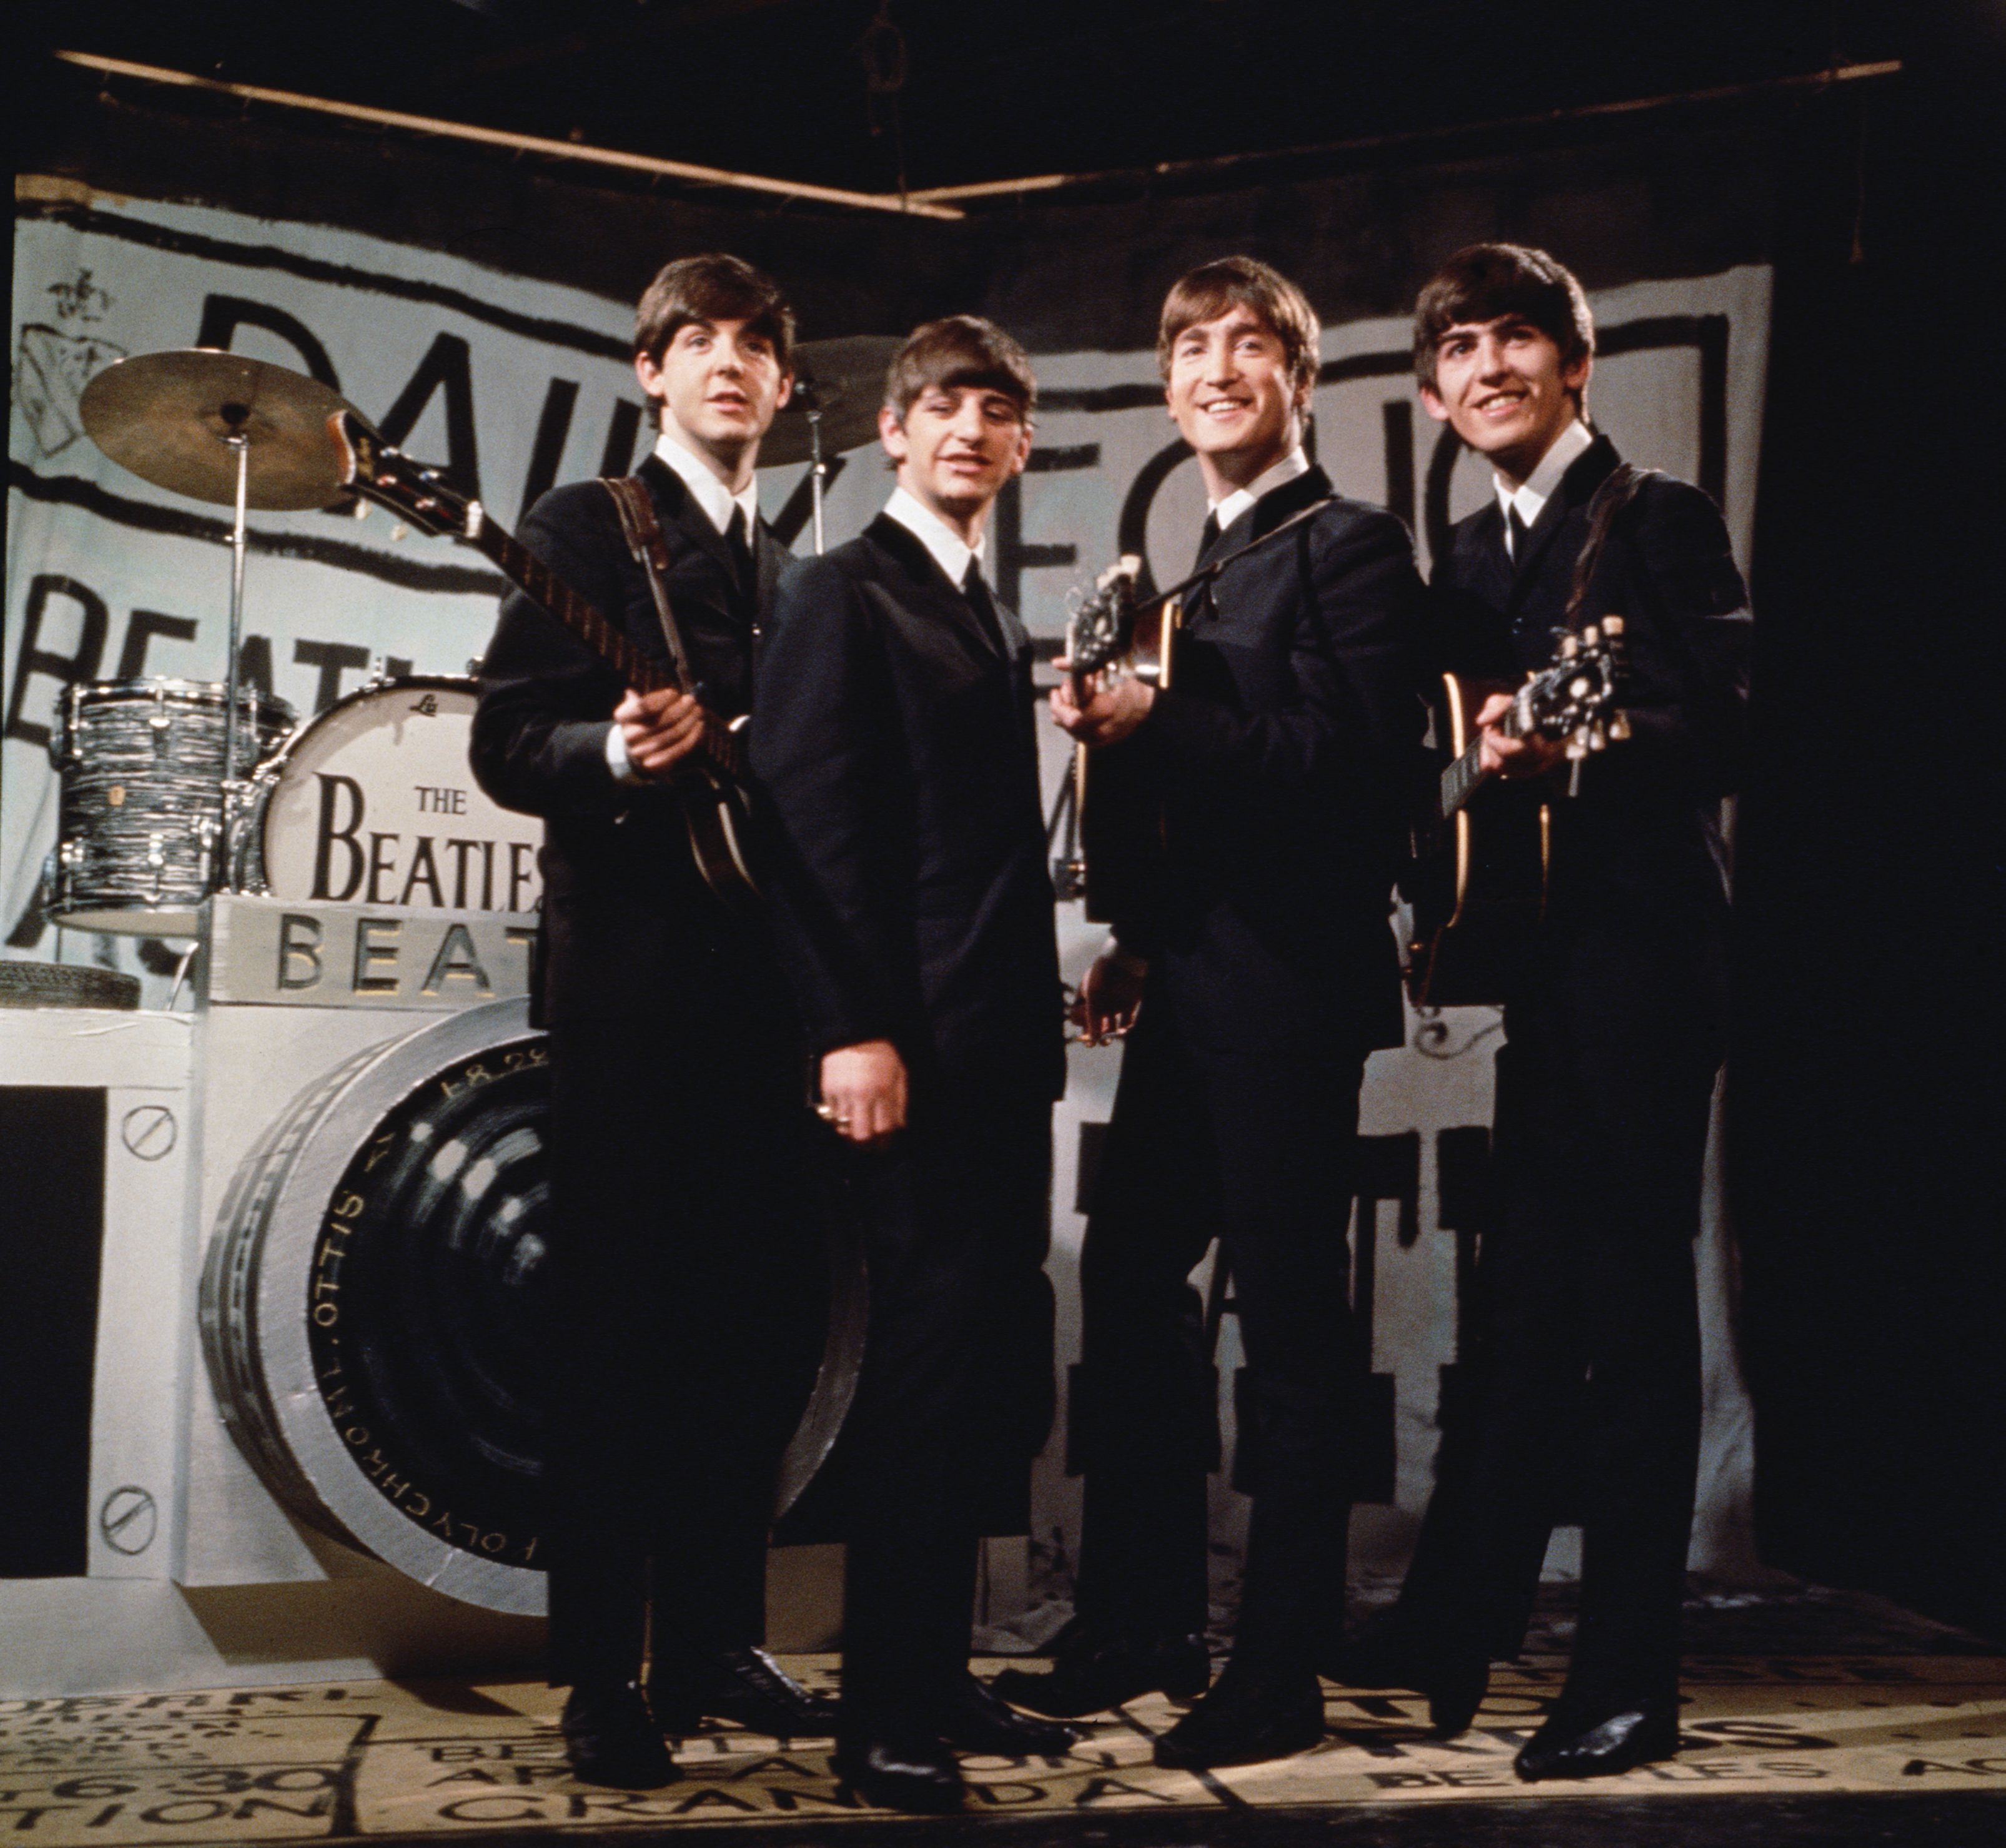 The Beatles in suits during the "I Saw Her Standing There" era